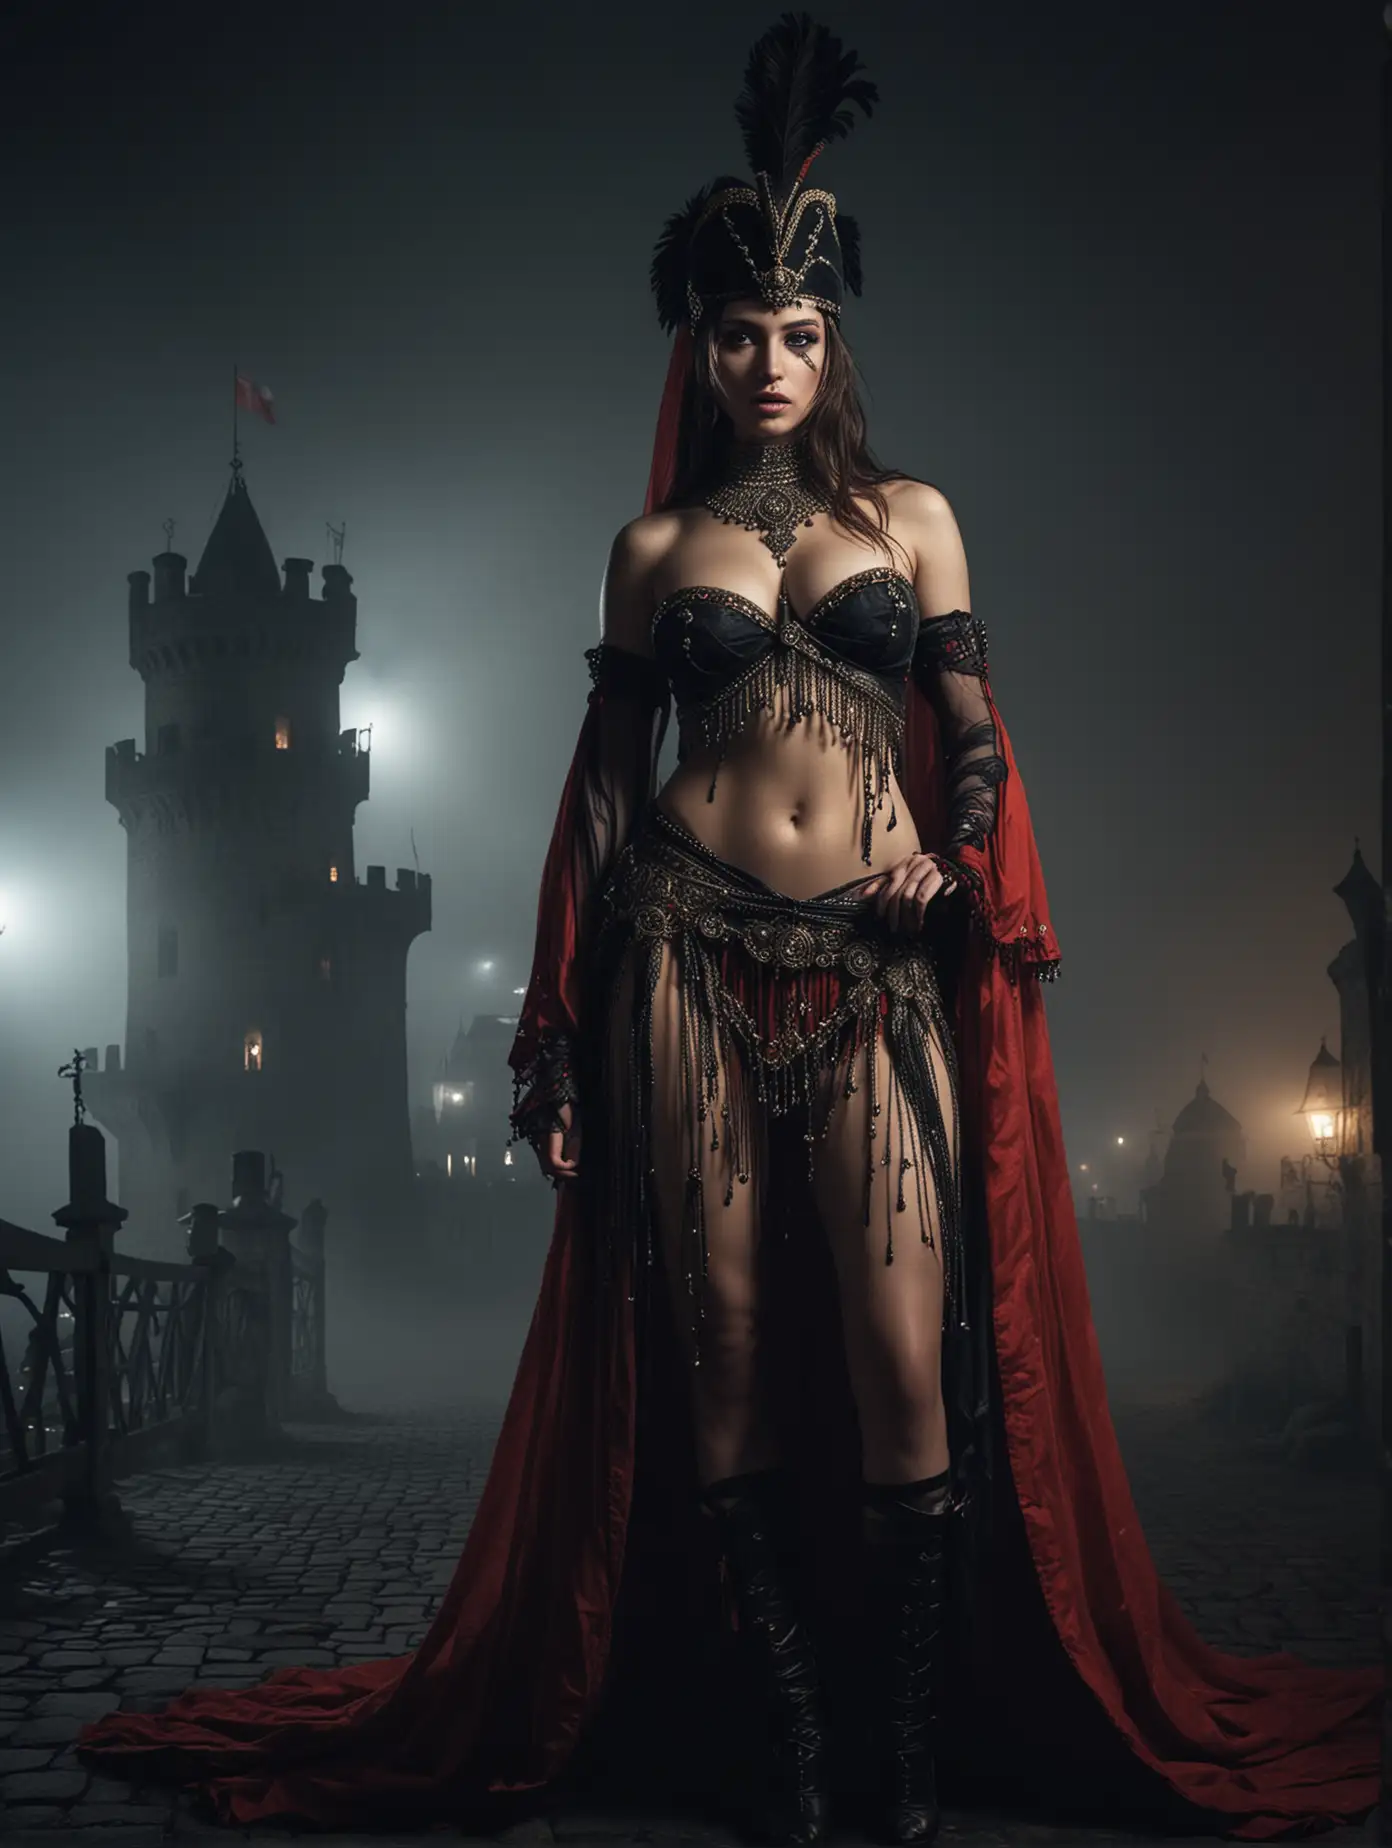 An epic scene in 17th century featuring a young Polish hussar at duty seduced by very beautiful veiled topless belly dancer, guard tower of a fortress, dark night, ghostly atmosphere, fog, close cinematic view.